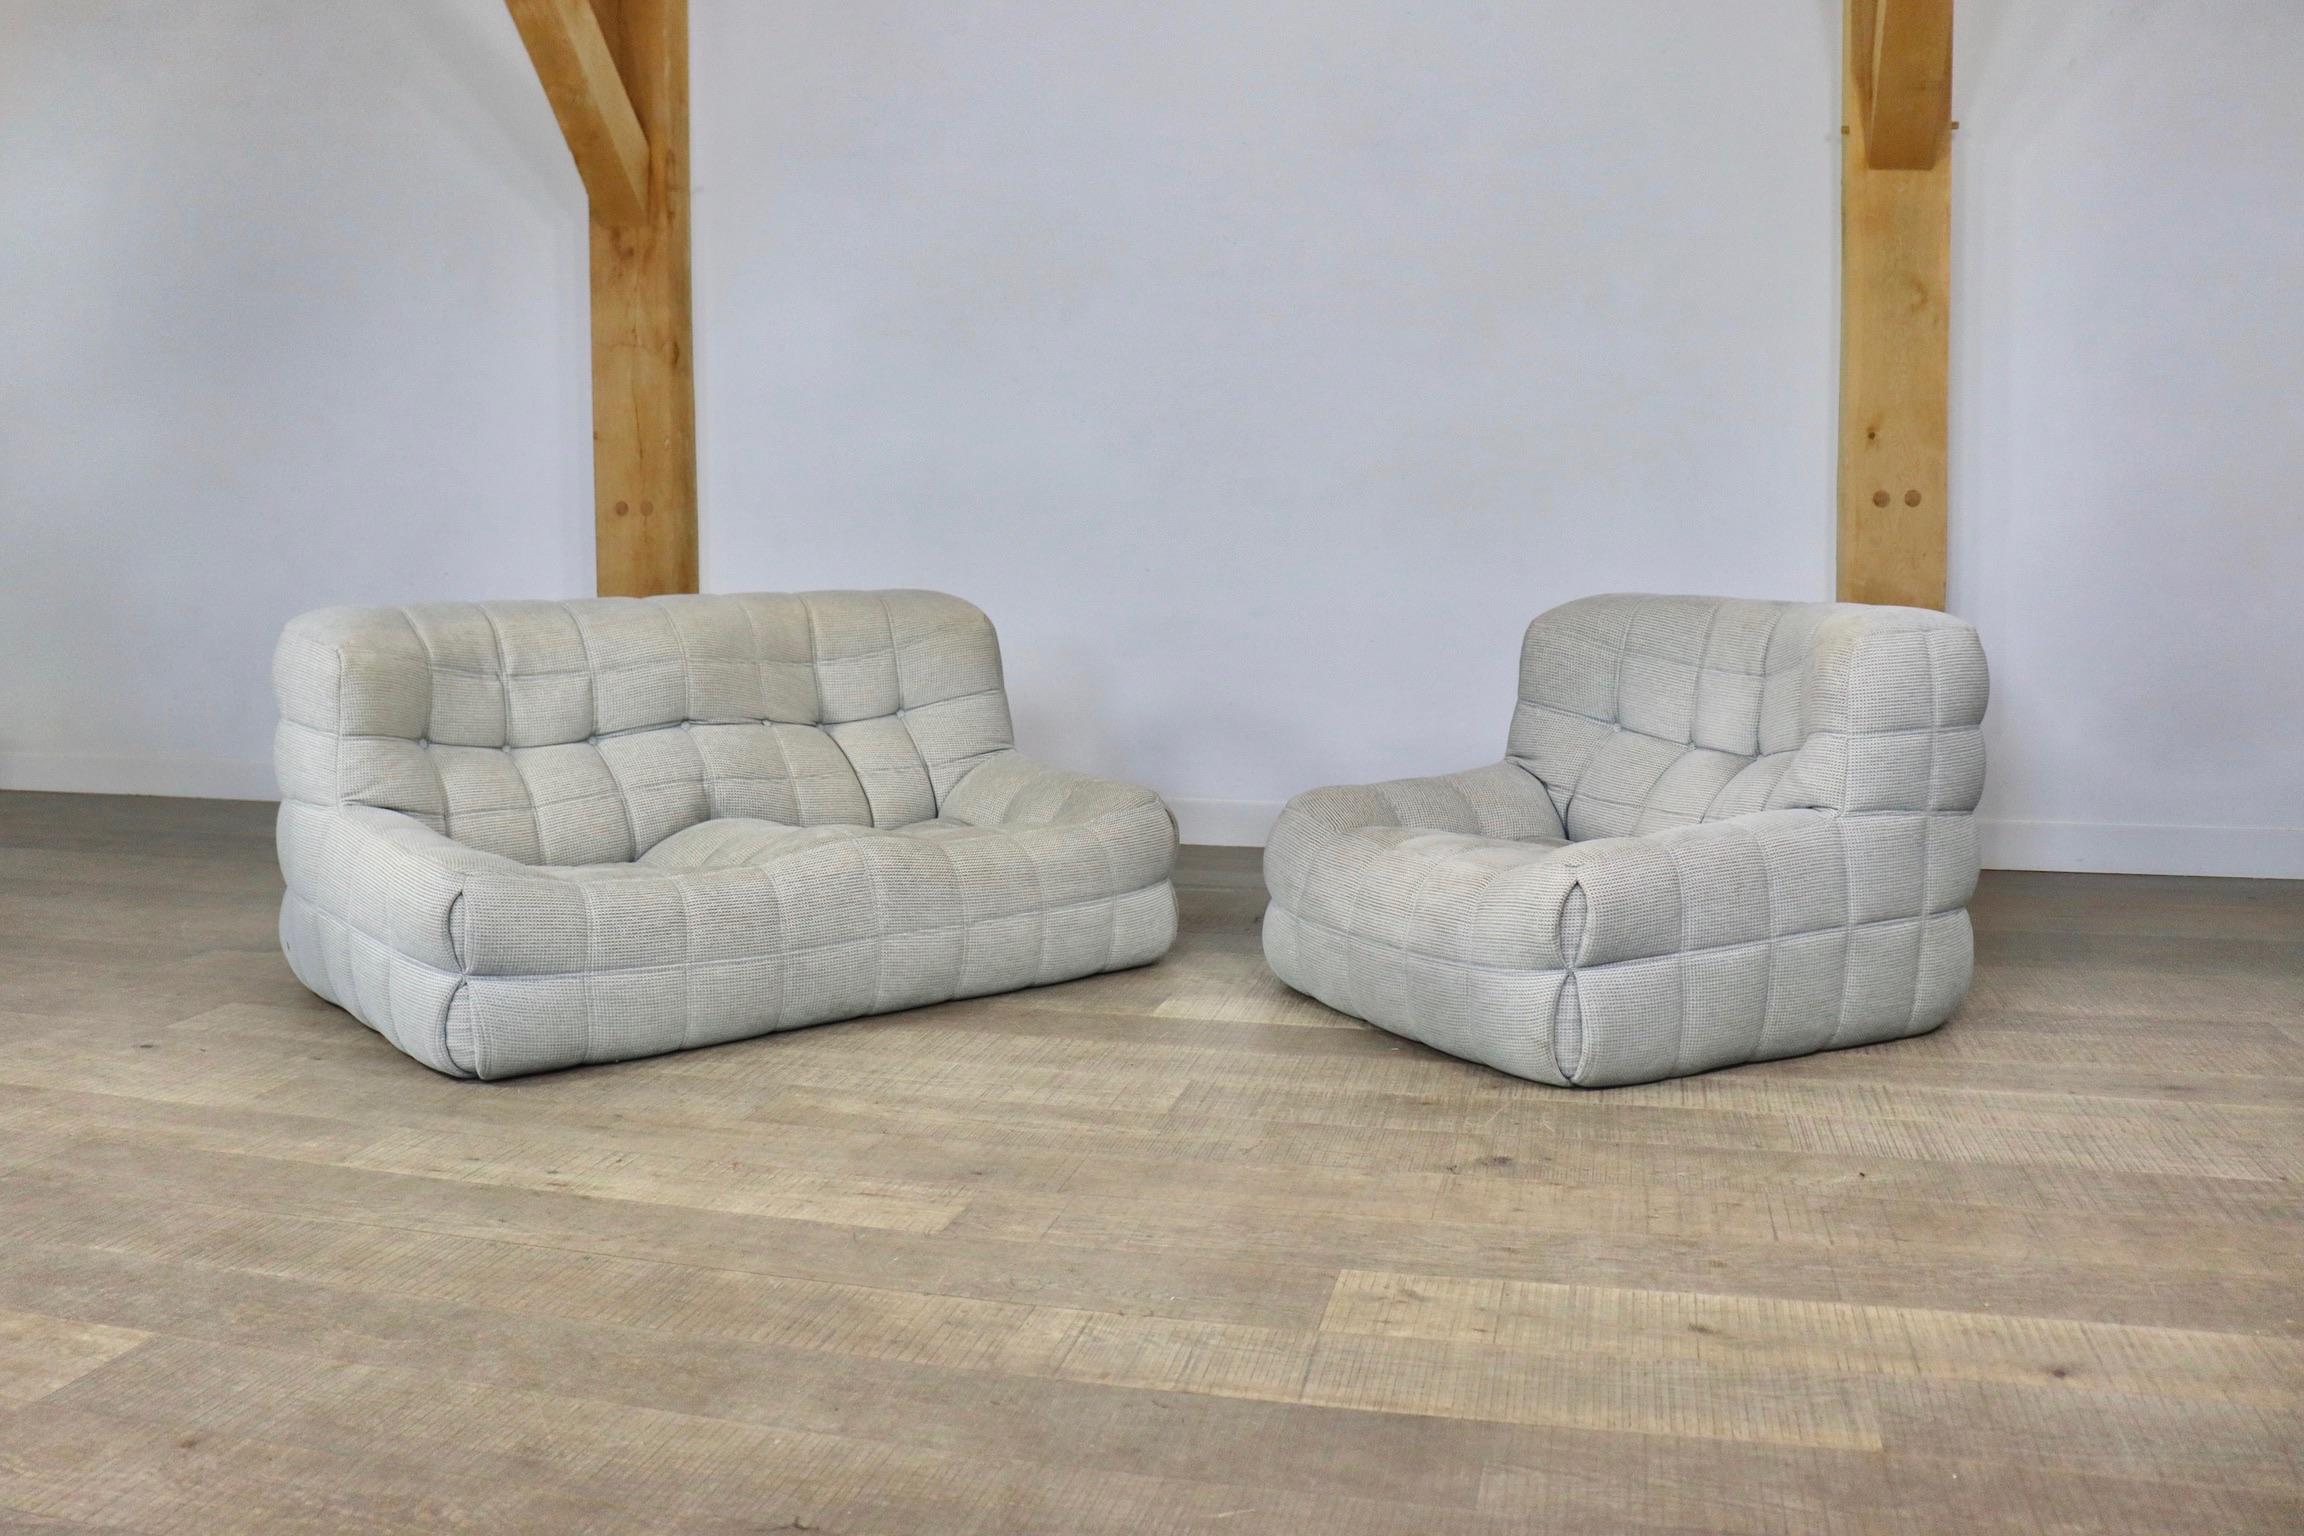 Stunning and extremely comfortable Kashima lounge chair and sofa in stunning light blue and cream Kvadrat fabric upholstery by Michel Ducaroy for Ligne Roset, 1970s. This set is in excellent condition and will bring comfort and luxurious design into